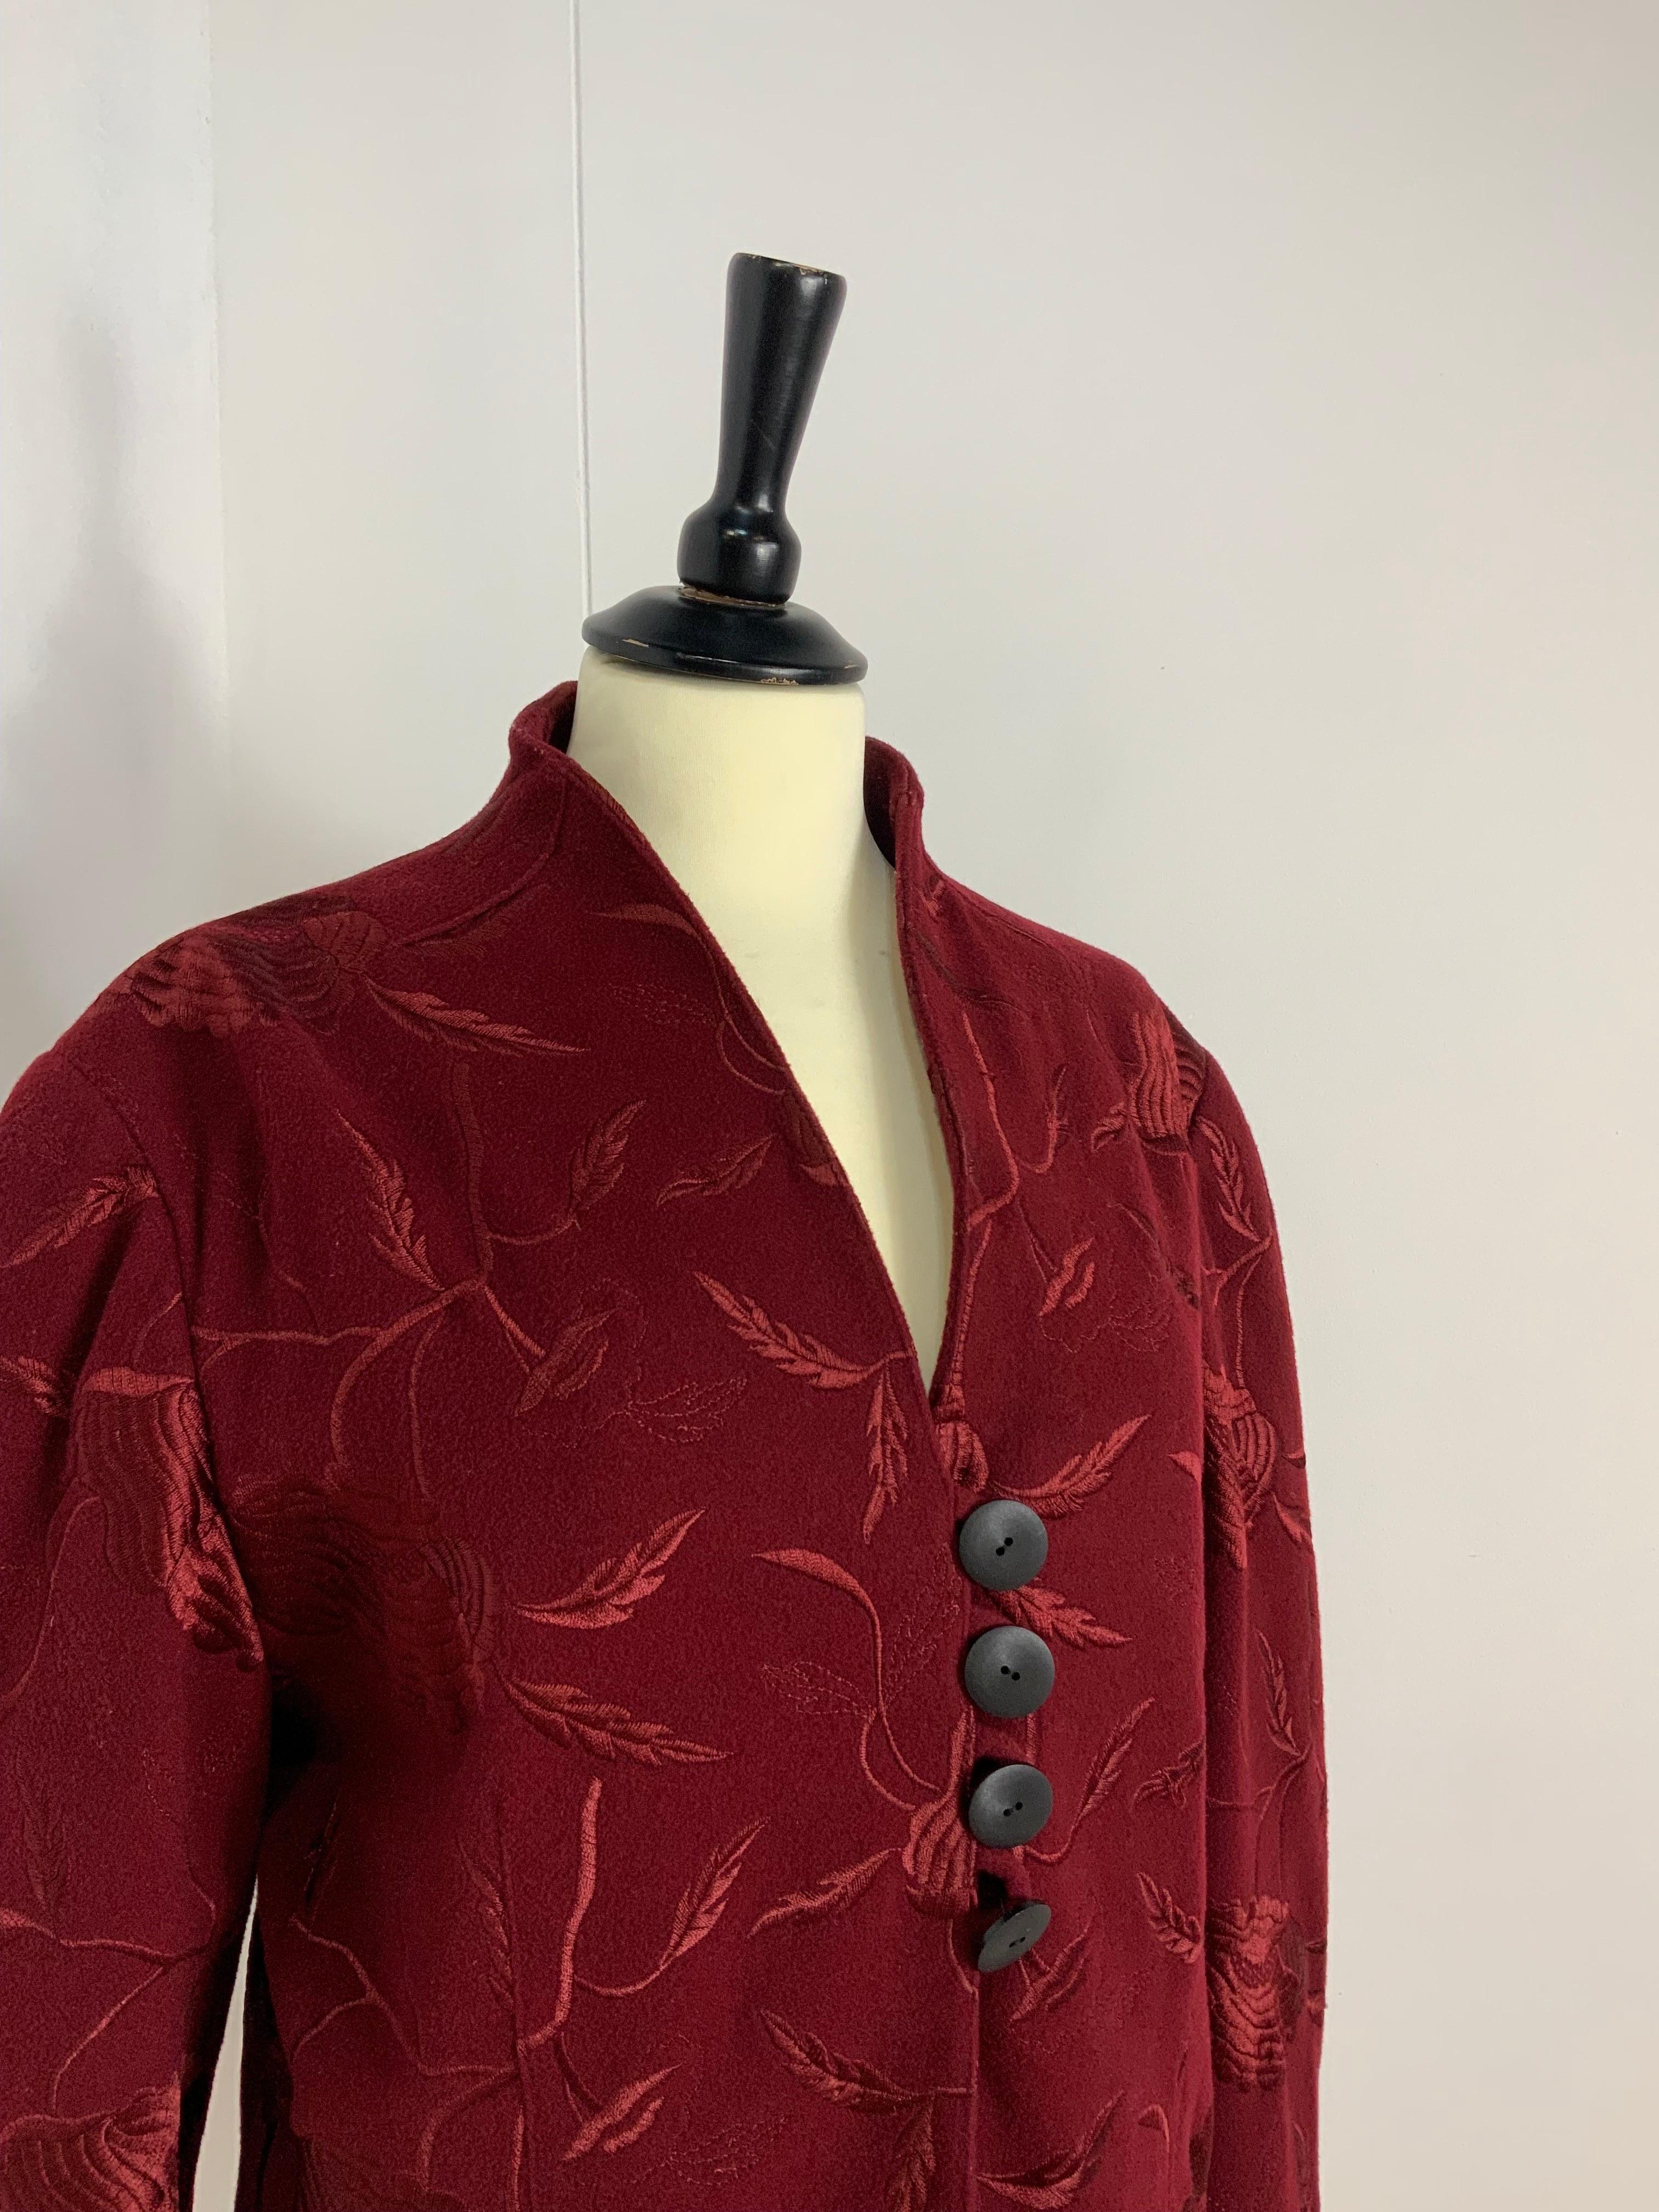 Krizia bordeaux embroidery jacket In Excellent Condition For Sale In Carnate, IT